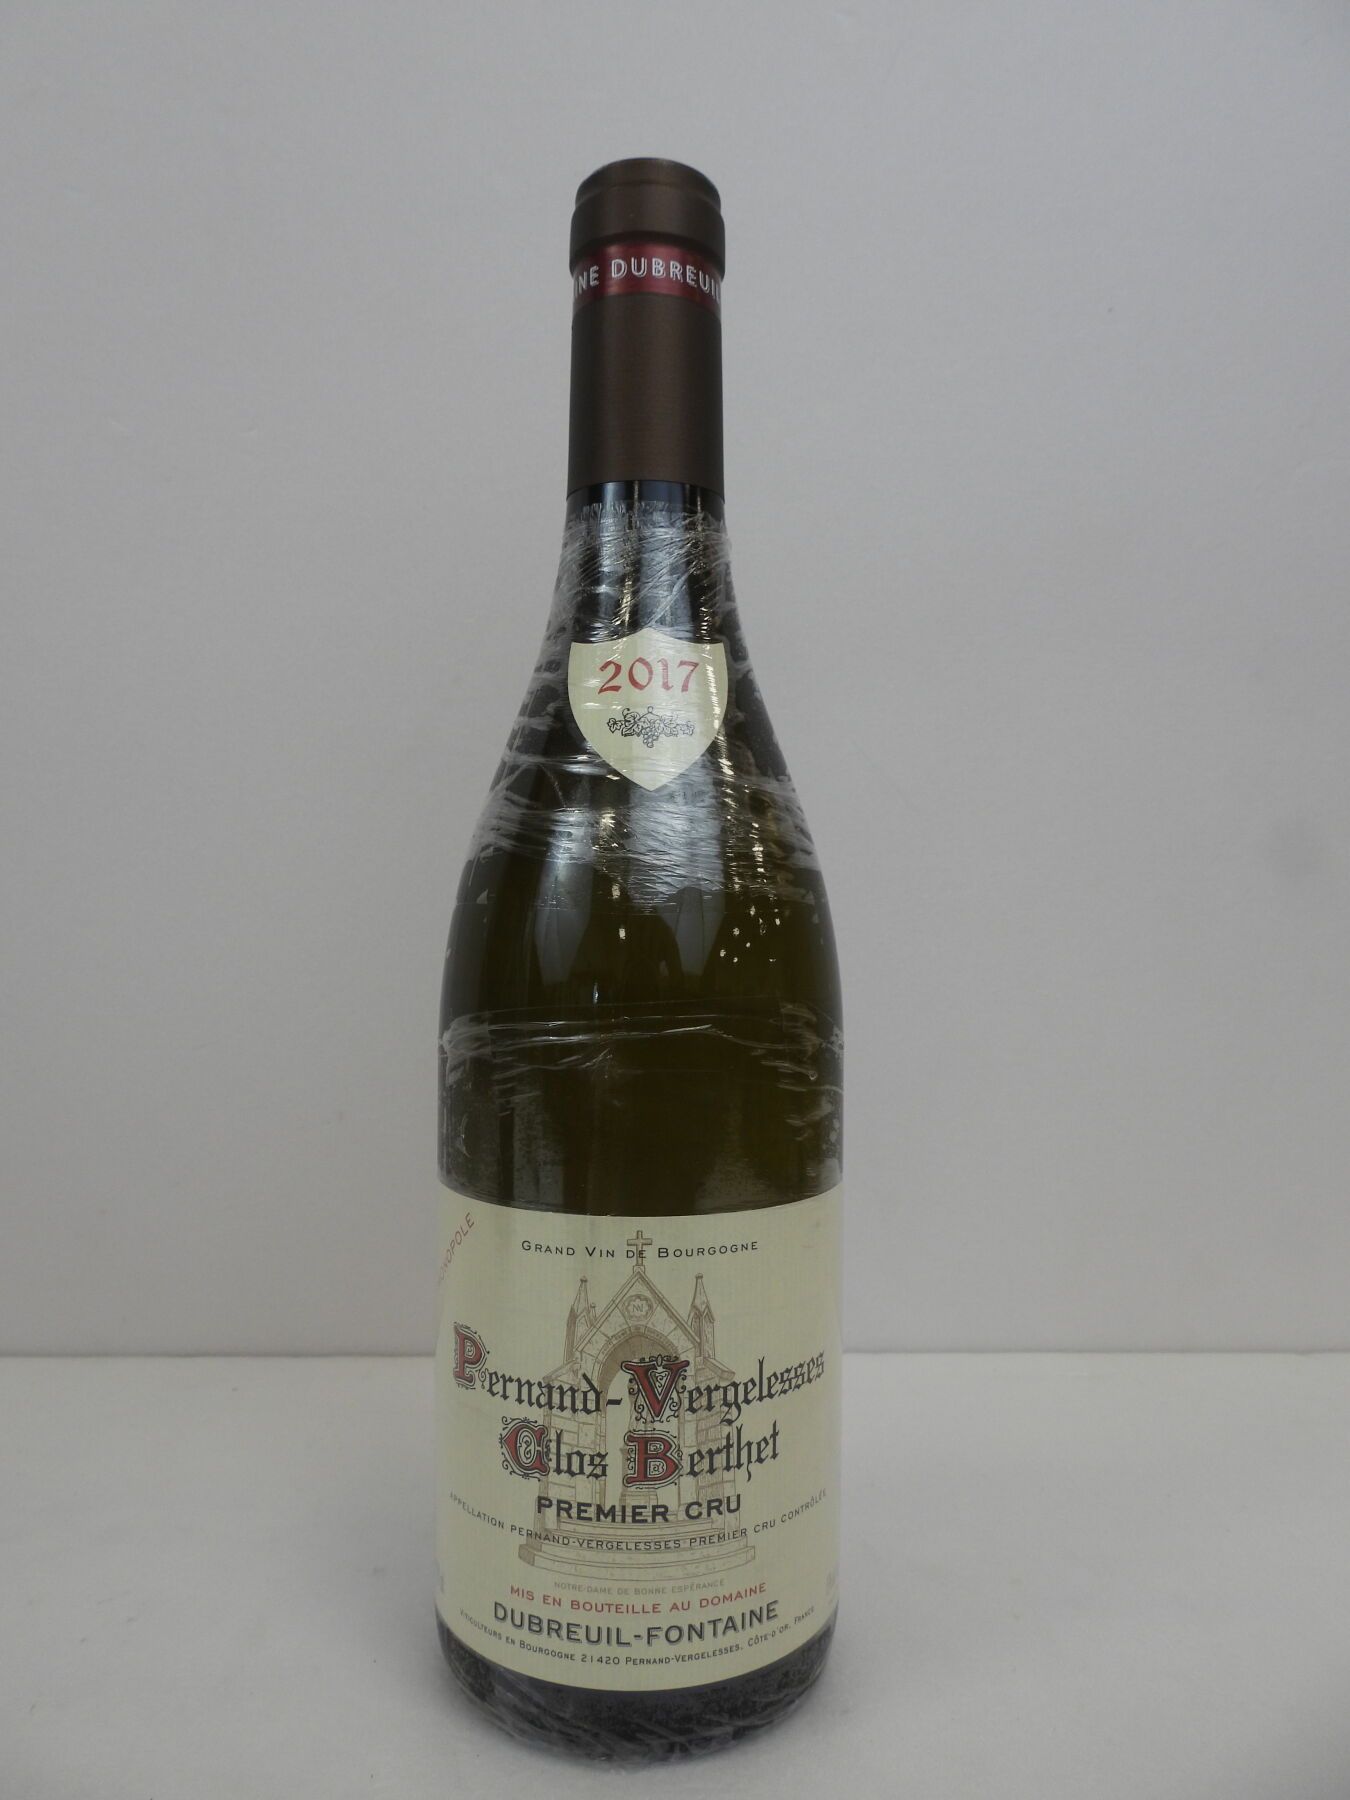 Null 1 bouteille Pernand Vergelesses Blanc Clos Beuthet Dubreuil Fontaine. 2017